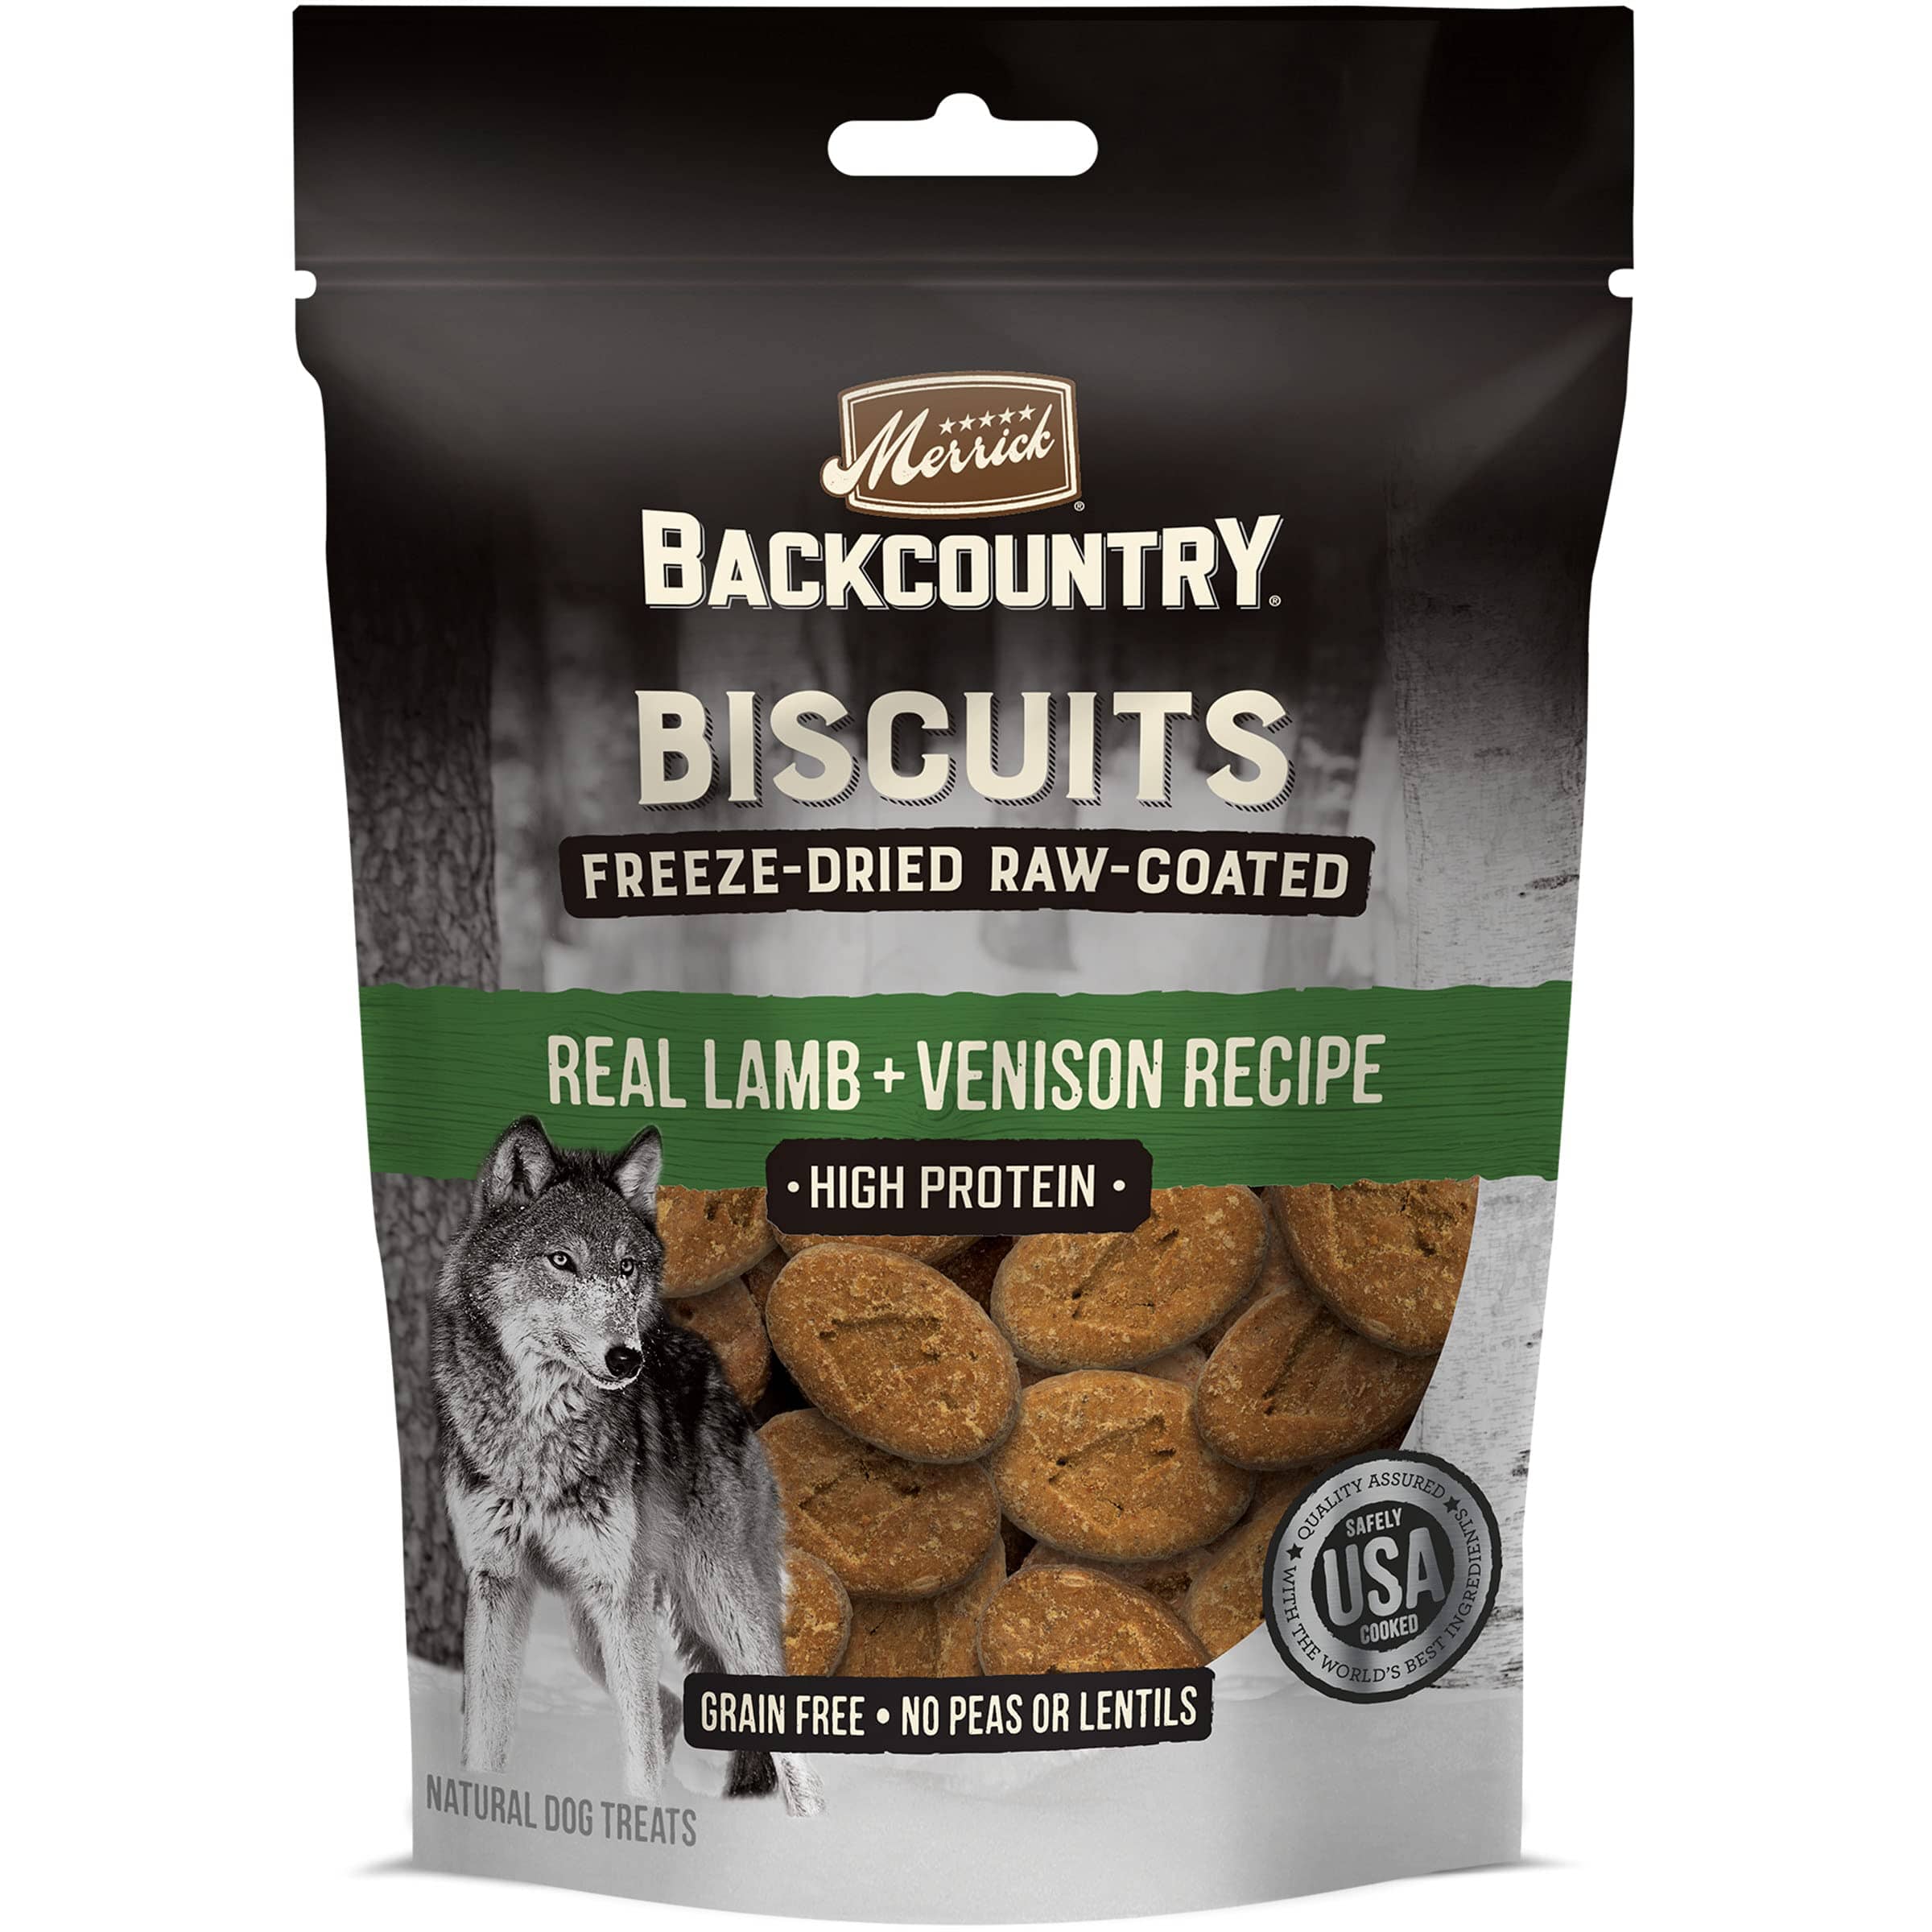 Merrick Backcountry Grain-Free Raw-Coated Lamb and Venison Dog Biscuits Treats - 10 Oz  